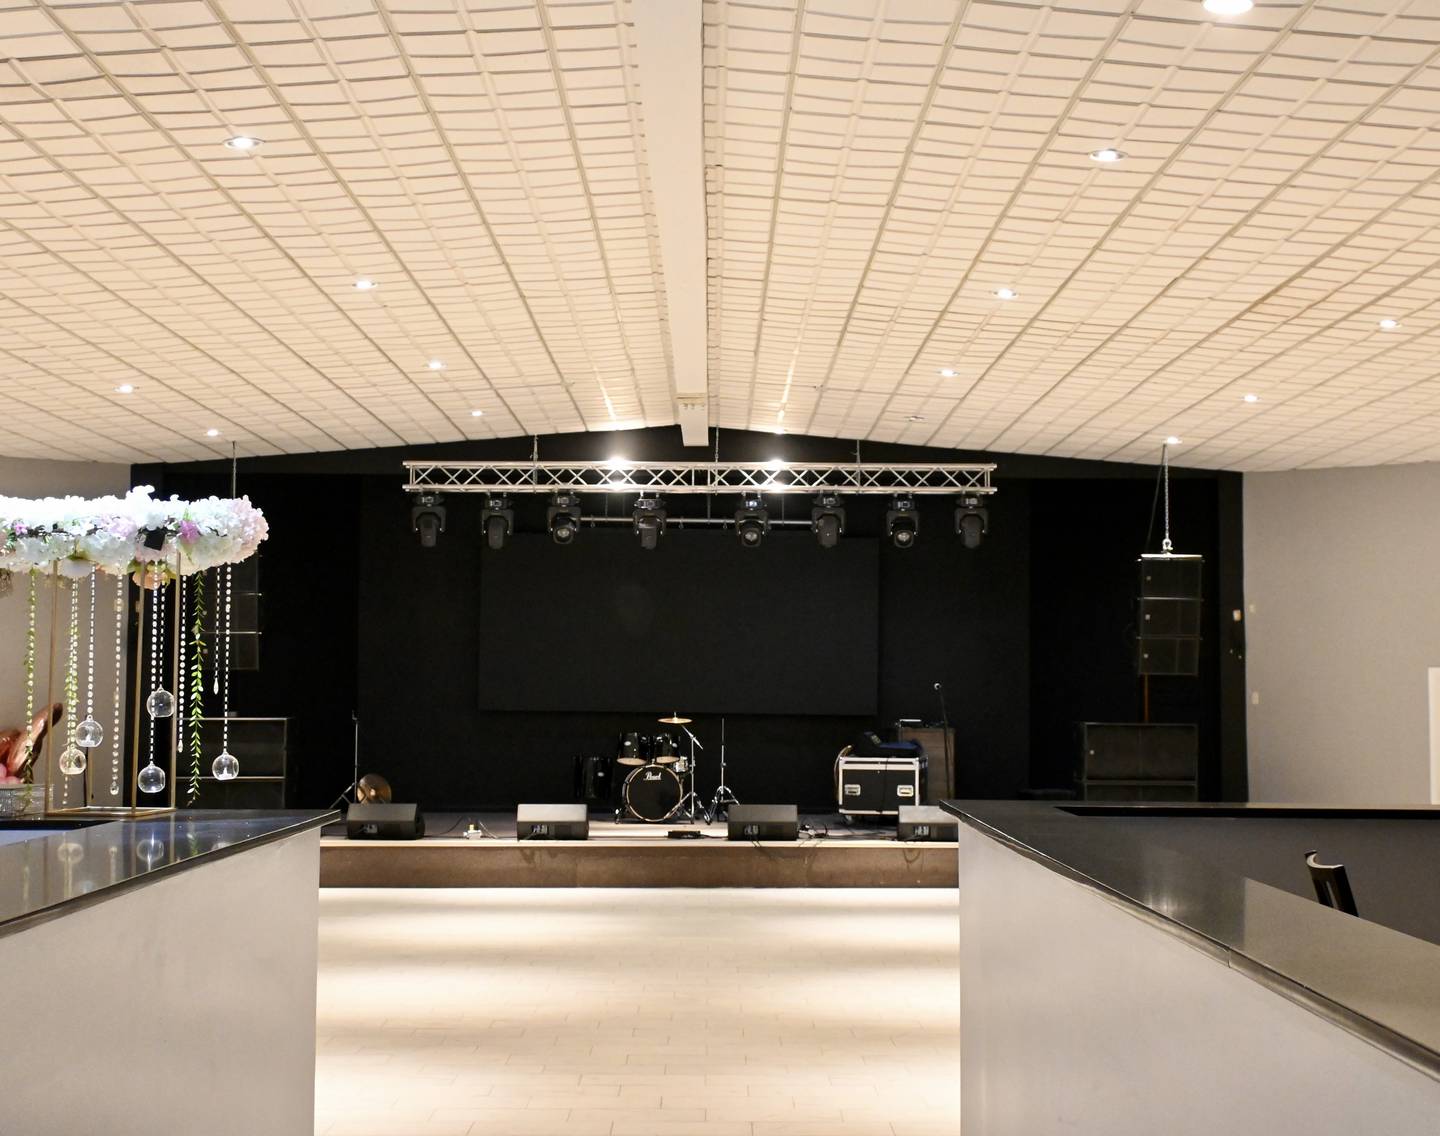 After a six-month renovation the theatre features a new modern design.  With a 250 to 300-person capacity, it is on the smaller side of a live music venue.